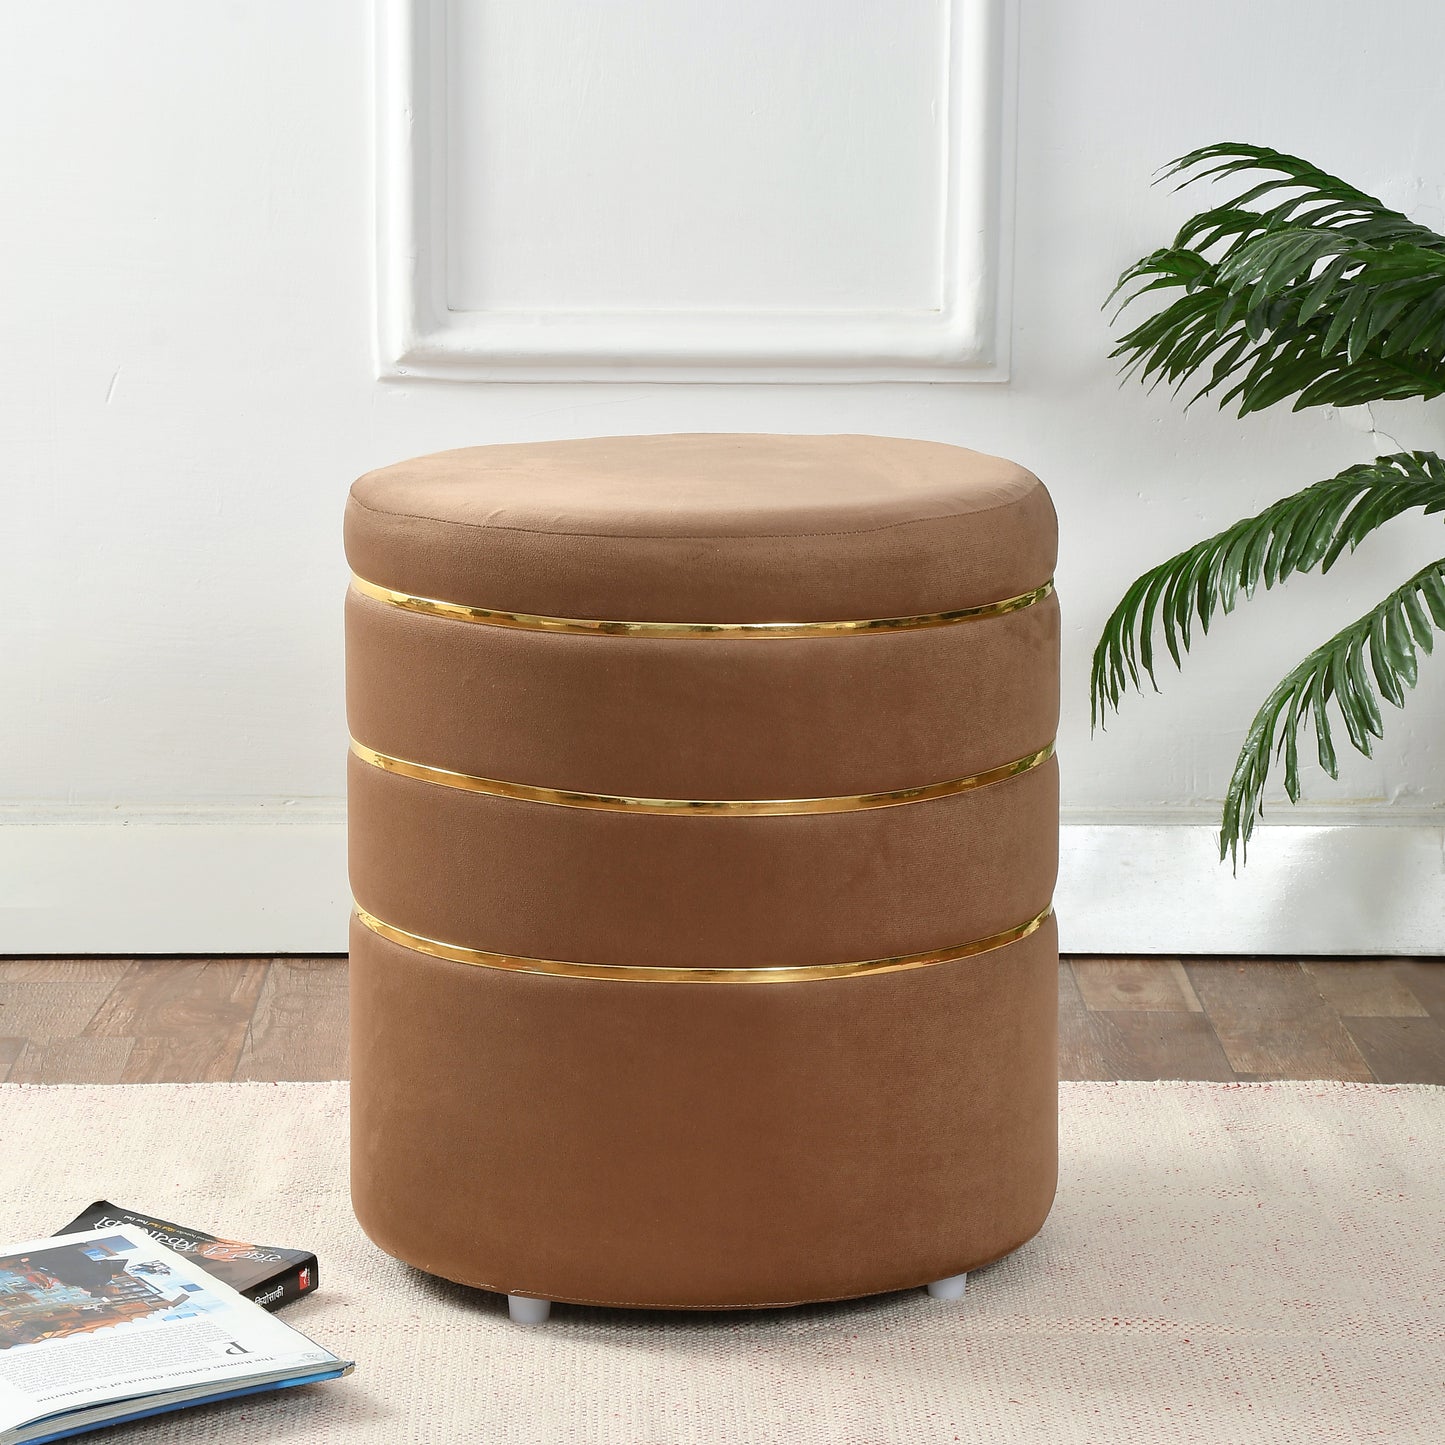 Homeaccex Ottoman Pouffe Puffy Stool Footstool, 18inch Height